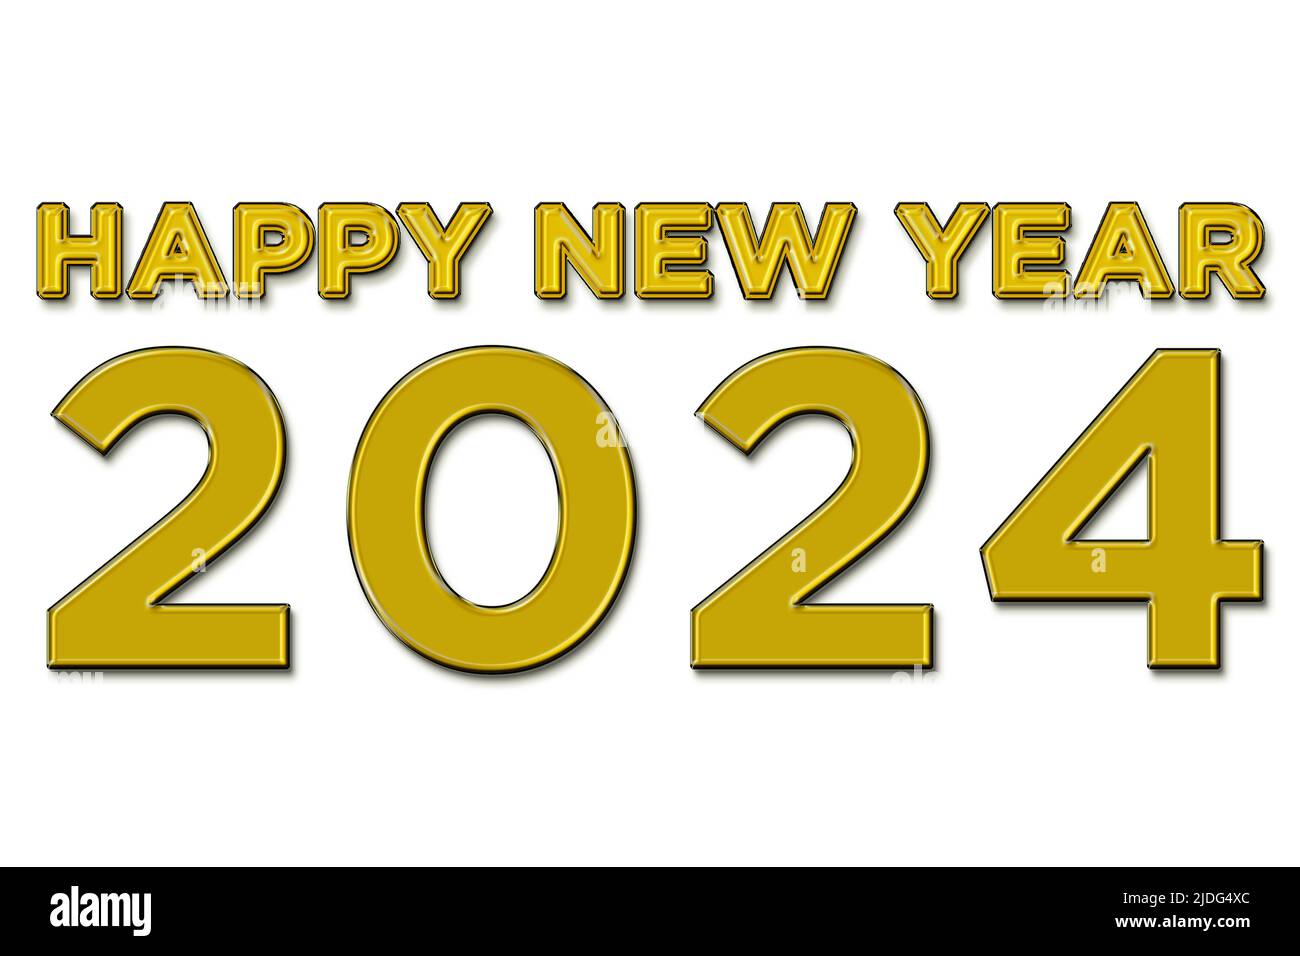 https://c8.alamy.com/comp/2JDG4XC/happy-new-year-2024-illustration-in-yellow-color-text-on-white-background-2JDG4XC.jpg